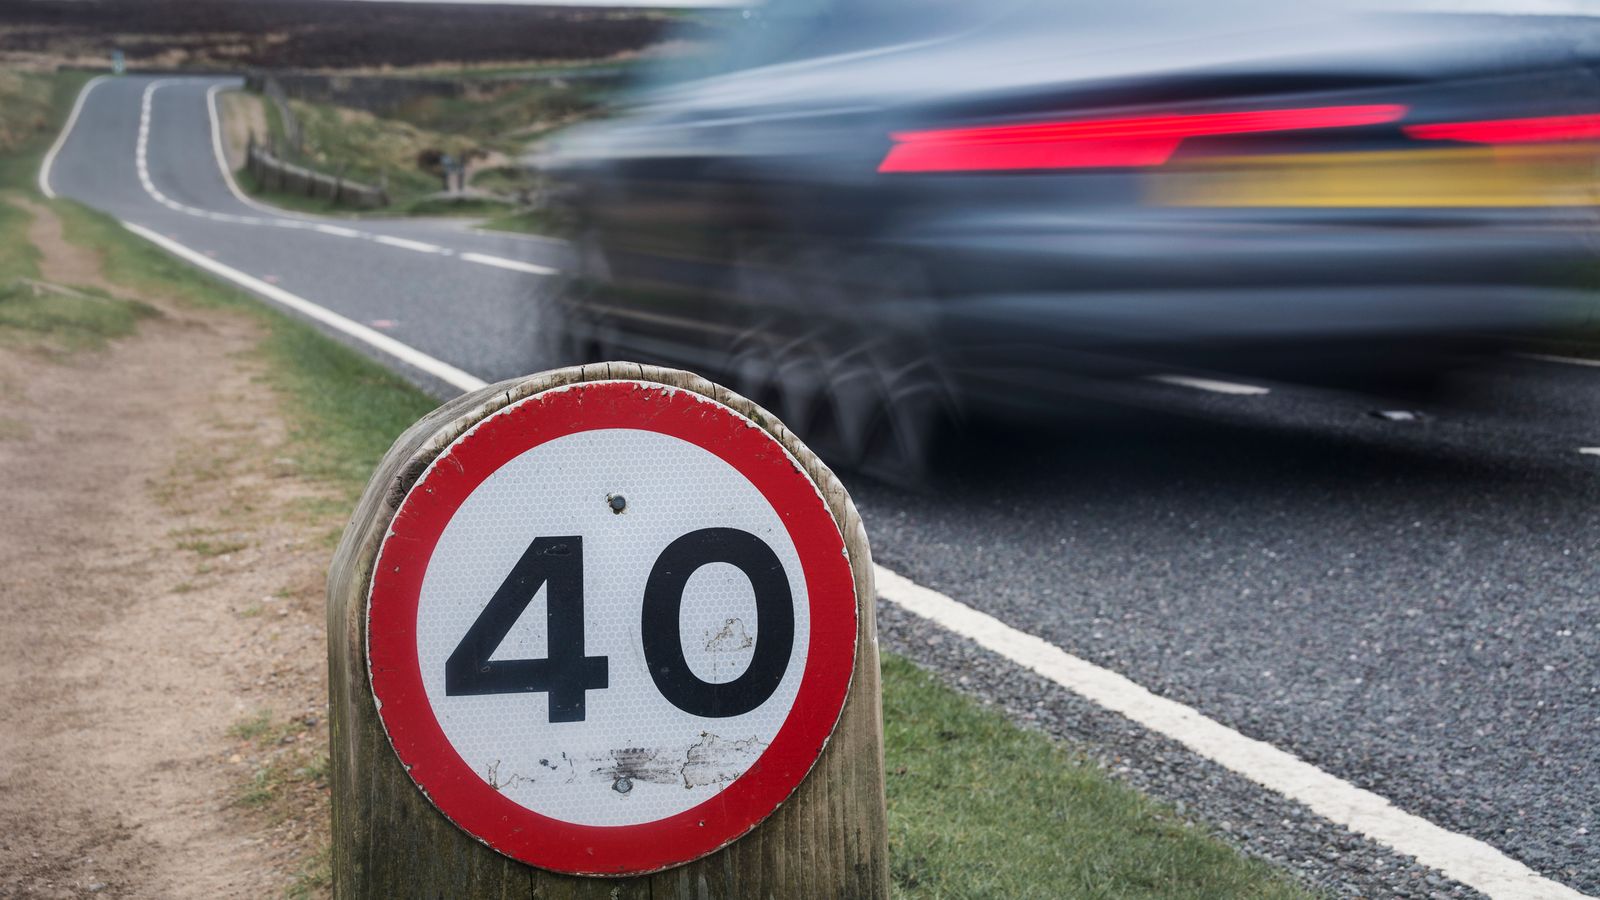 Thousands of drivers 'brazenly' ignoring bans - with one caught 20 times while disqualified